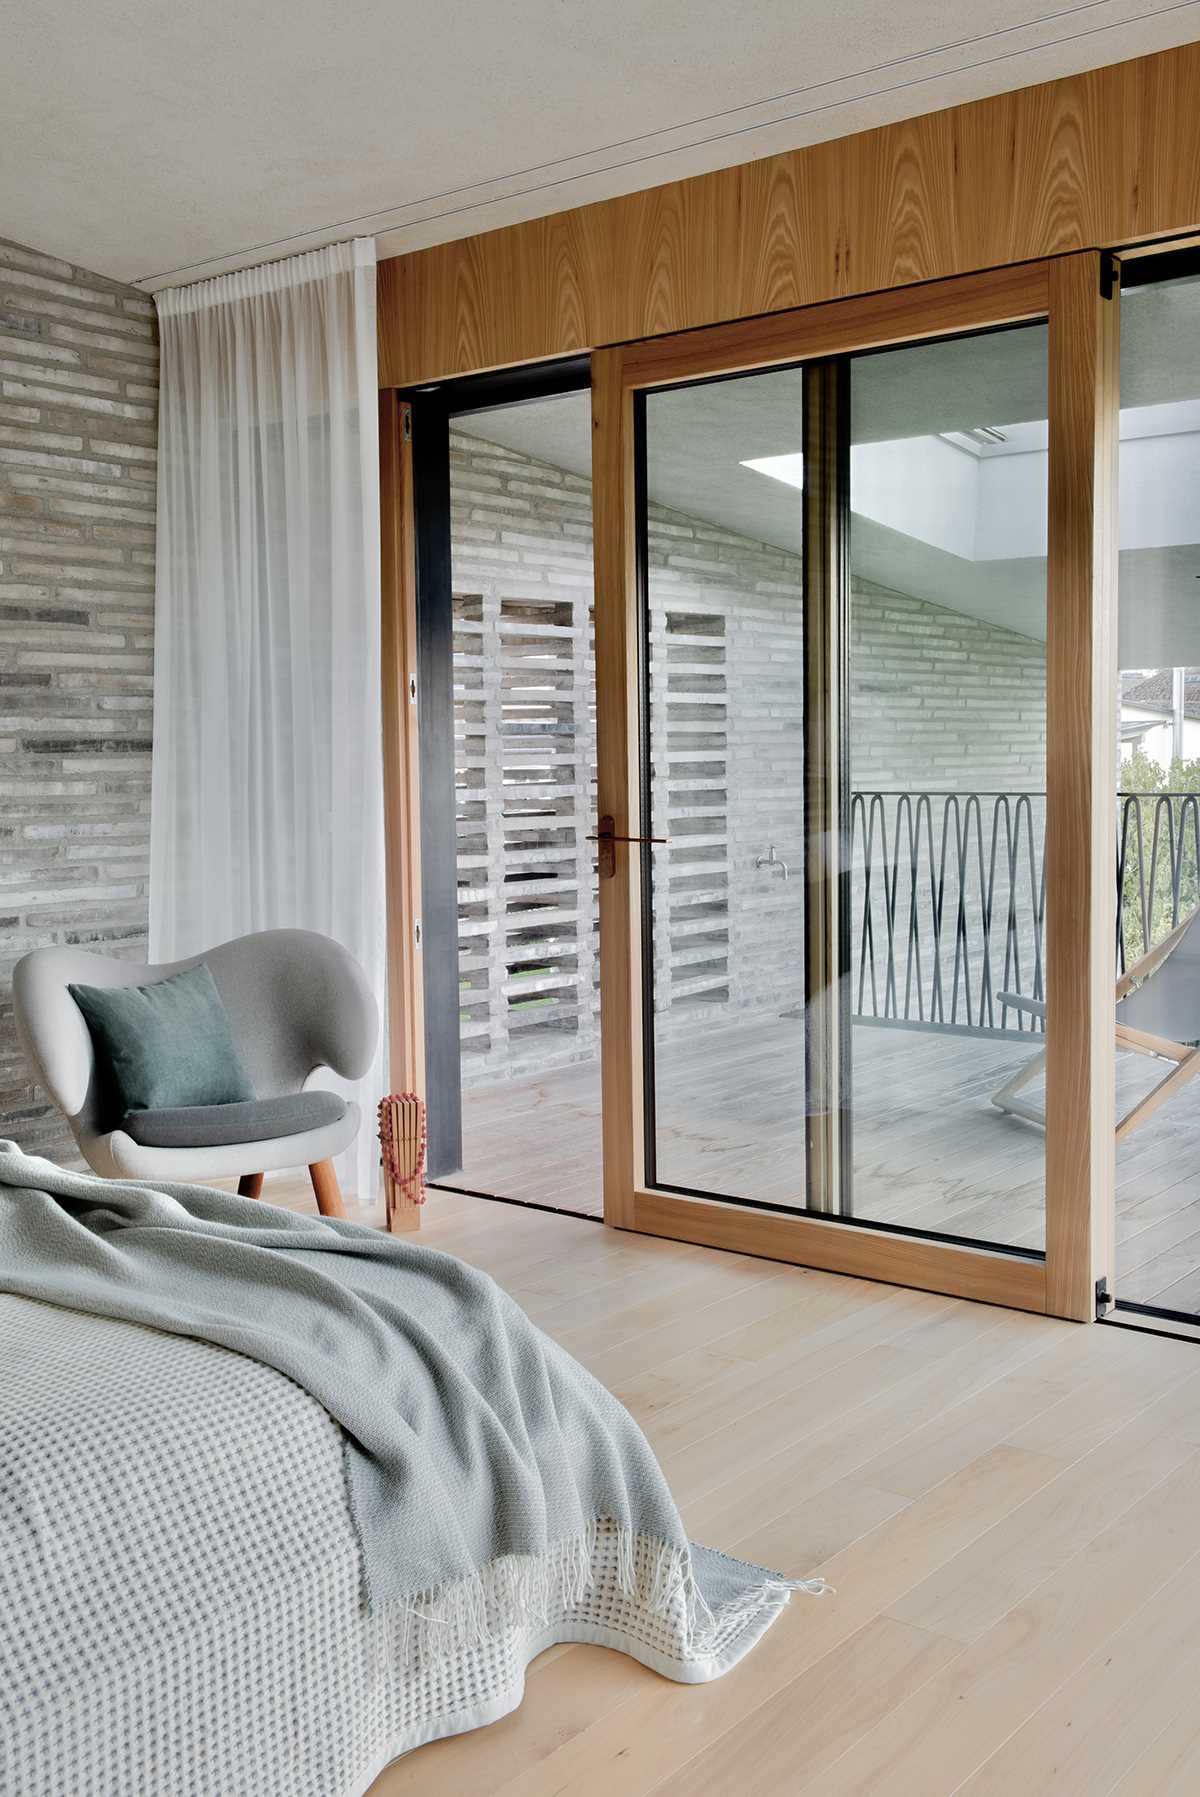 In this modern bedroom, the brick wall continues from the exterior through to the interior, while a balcony can be accessed through a sliding wood-framed glass door.